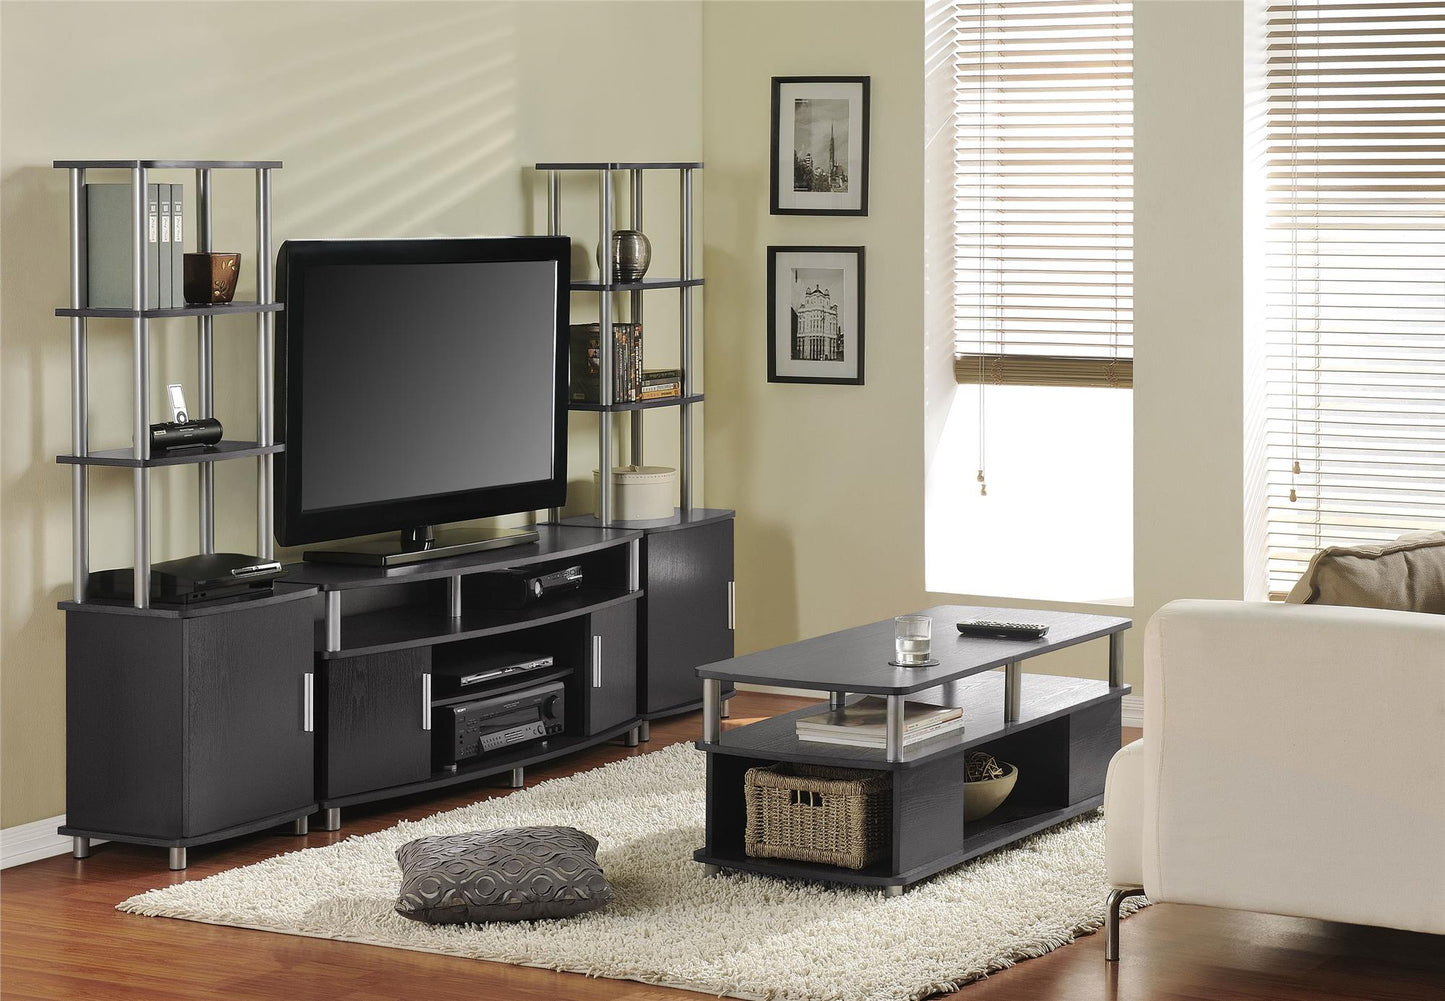 Carson Contemporary TV Stand for TVs up to 50 Inch - Espresso